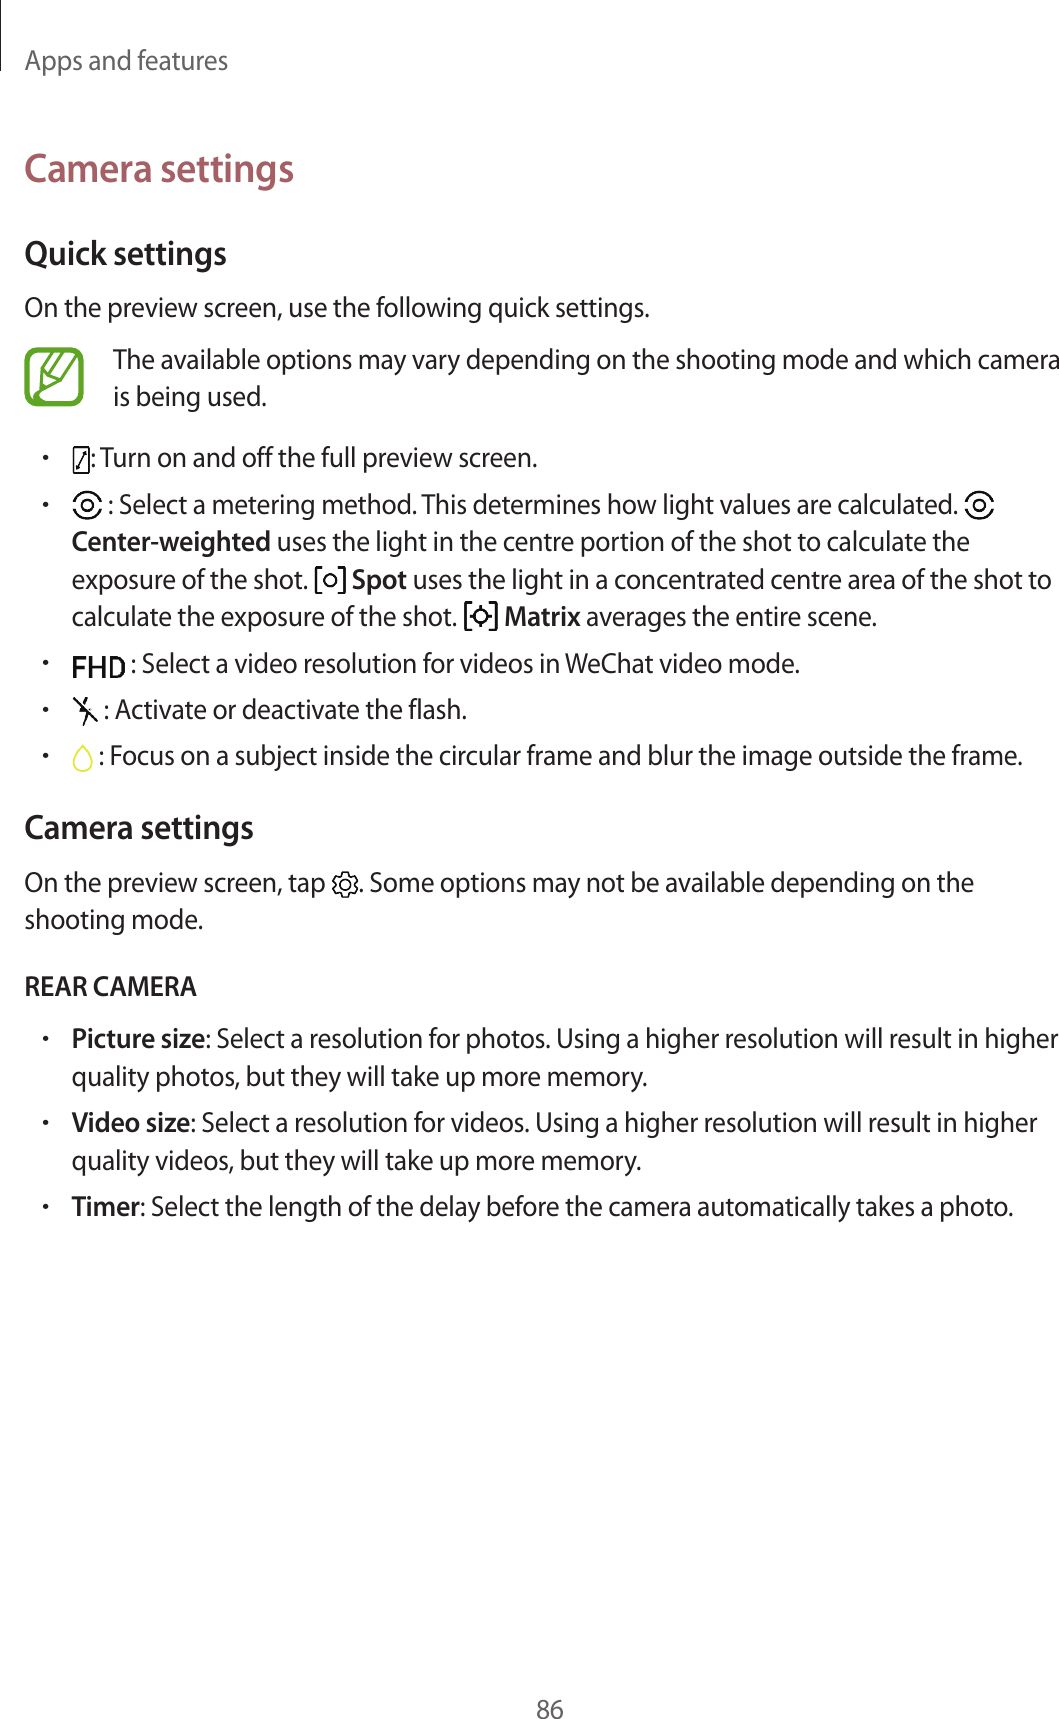 Apps and features86Camera settingsQuick settingsOn the preview screen, use the following quick settings.The available options may vary depending on the shooting mode and which camera is being used.•: Turn on and off the full preview screen.• : Select a metering method. This determines how light values are calculated.   Center-weighted uses the light in the centre portion of the shot to calculate the exposure of the shot.   Spot uses the light in a concentrated centre area of the shot to calculate the exposure of the shot.   Matrix averages the entire scene.• : Select a video resolution for videos in WeChat video mode.• : Activate or deactivate the flash.• : Focus on a subject inside the circular frame and blur the image outside the frame.Camera settingsOn the preview screen, tap  . Some options may not be available depending on the shooting mode.REAR CAMERA•Picture size: Select a resolution for photos. Using a higher resolution will result in higher quality photos, but they will take up more memory.•Video size: Select a resolution for videos. Using a higher resolution will result in higher quality videos, but they will take up more memory.•Timer: Select the length of the delay before the camera automatically takes a photo.